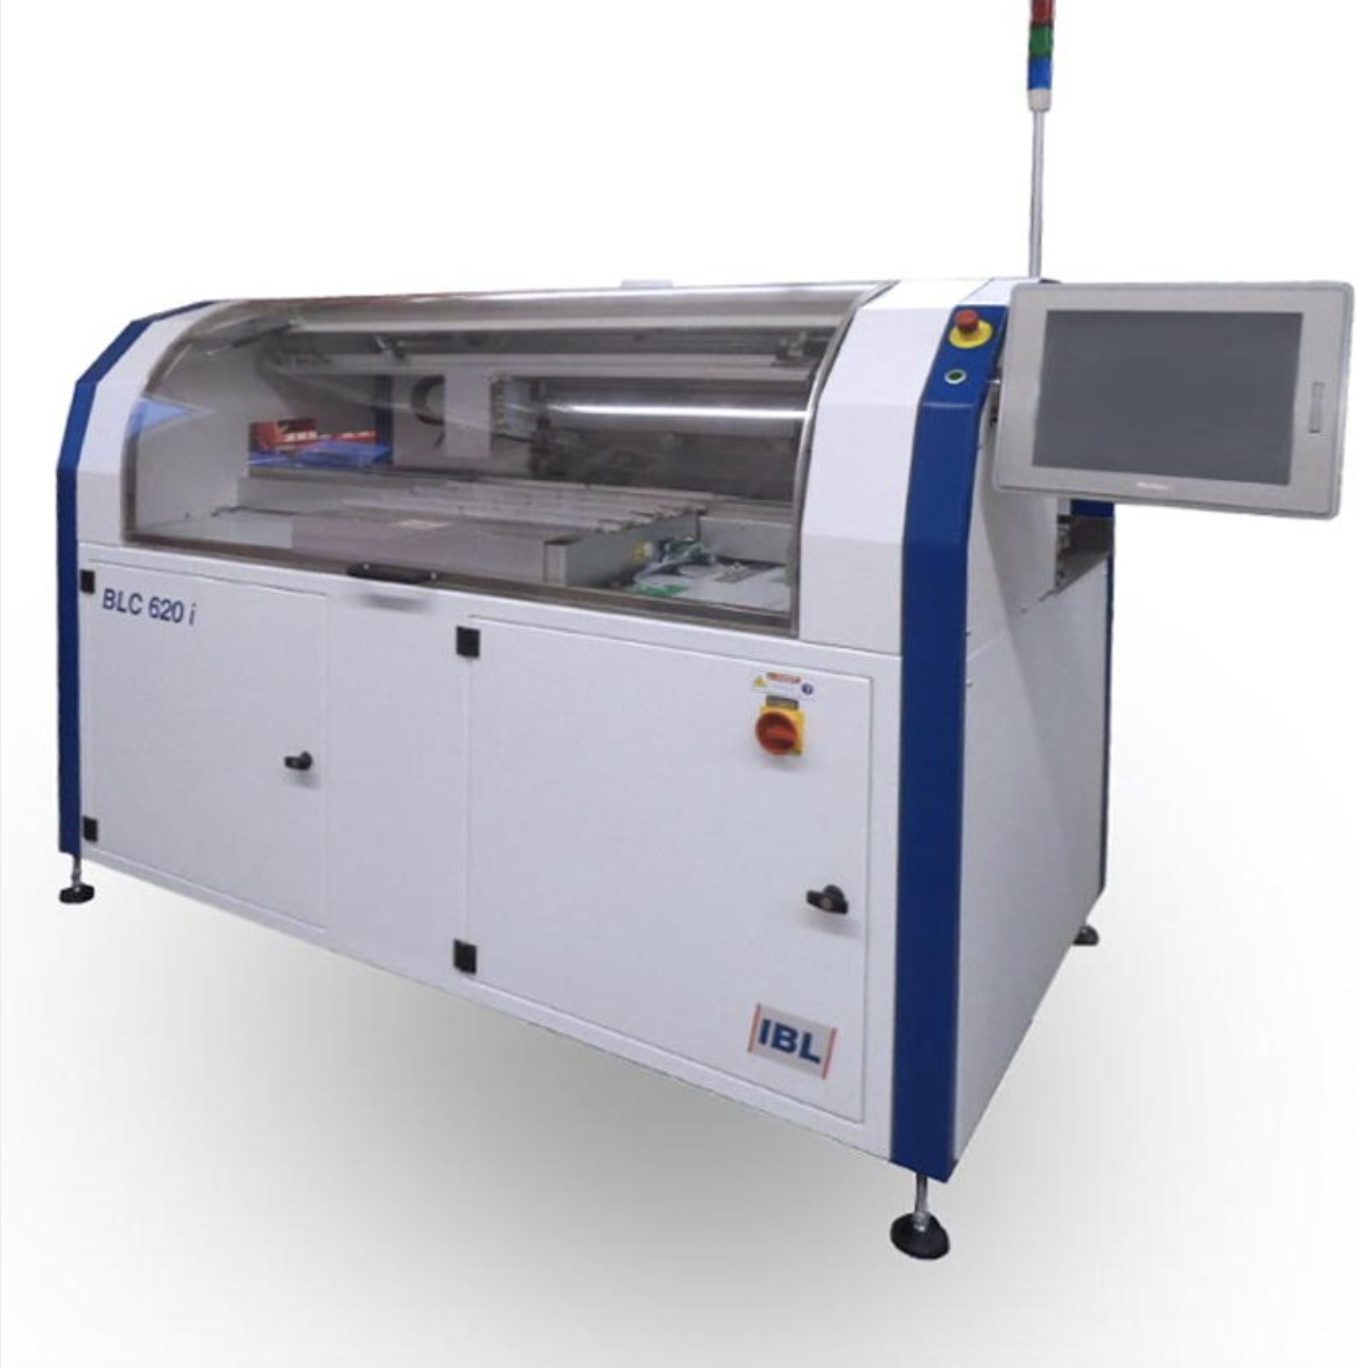 SPEEDBOARD INVESTS IN VAPOUR PHASE SOLDERING FROM BLUNDELL